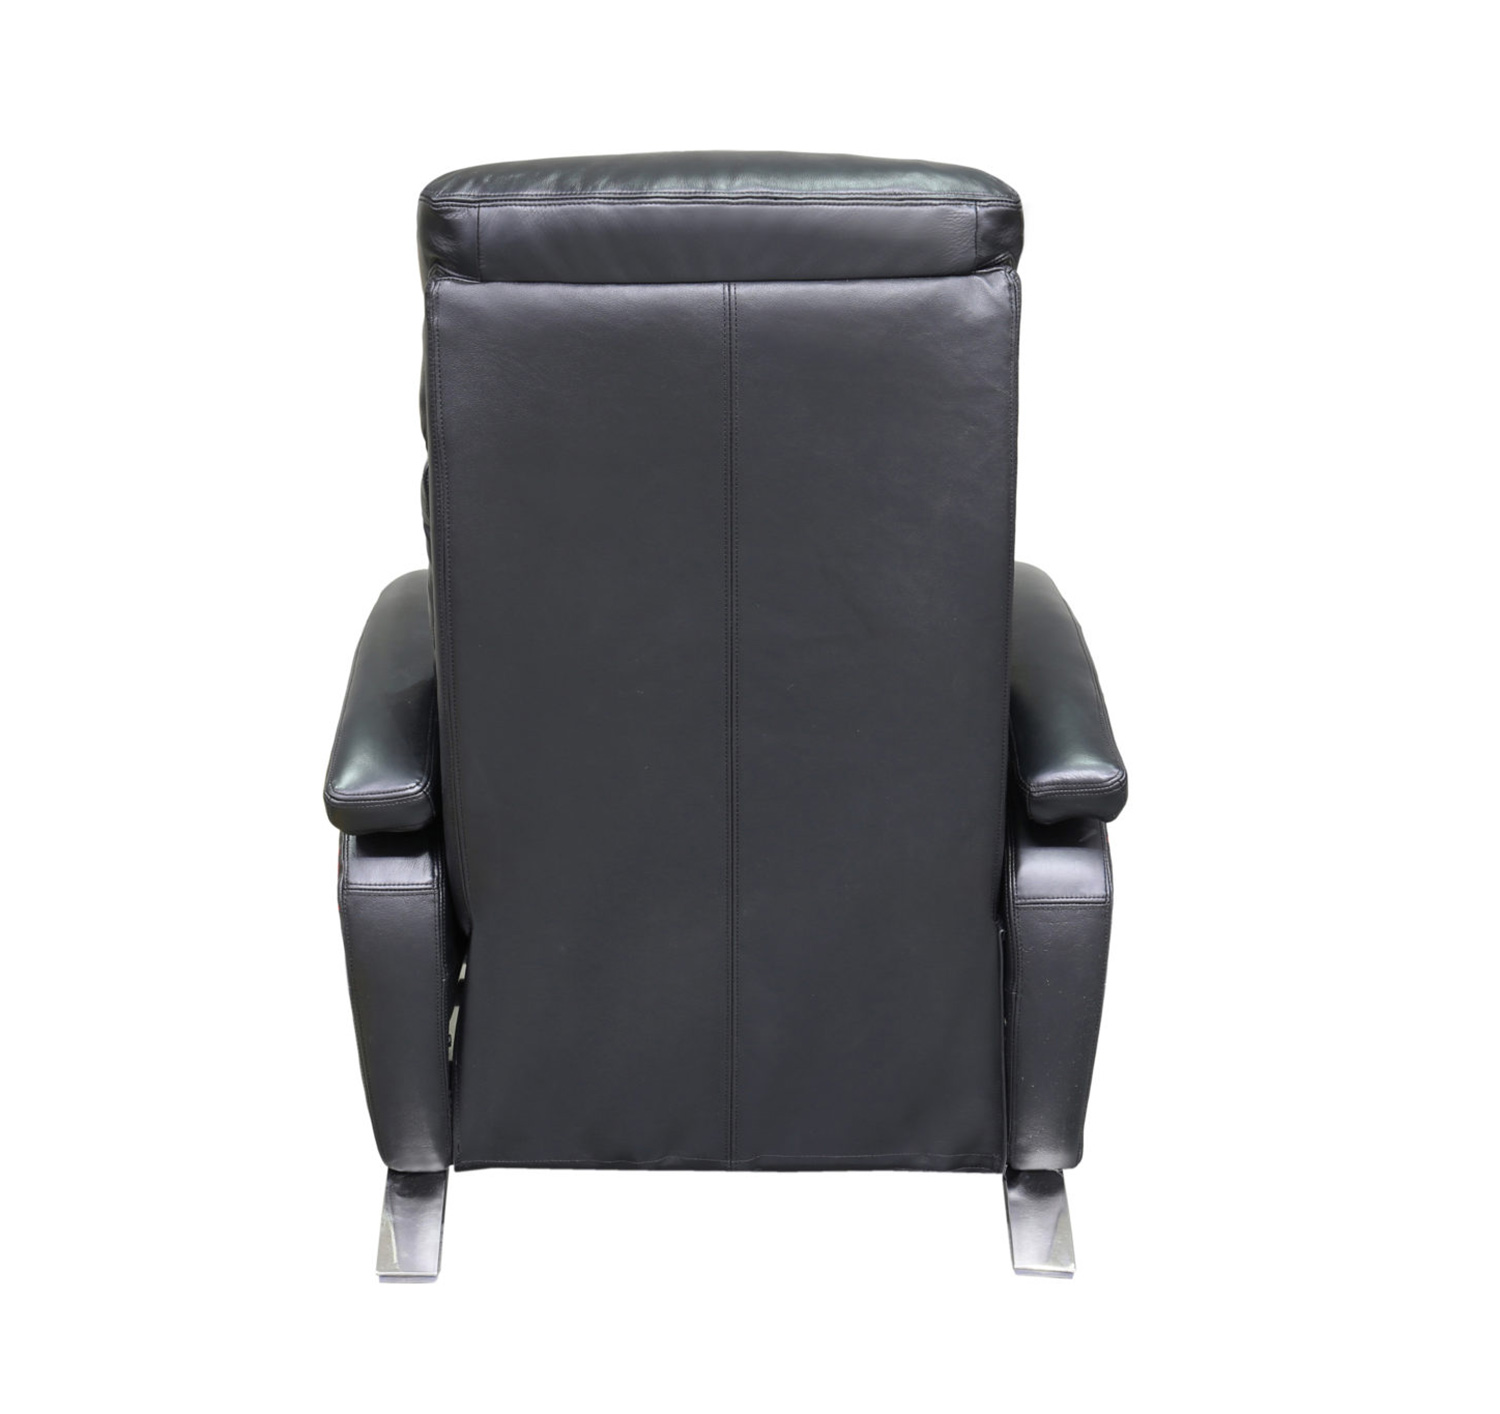 Barcalounger Giovanni Recliner Chair - Wenlock Onyx/all leather